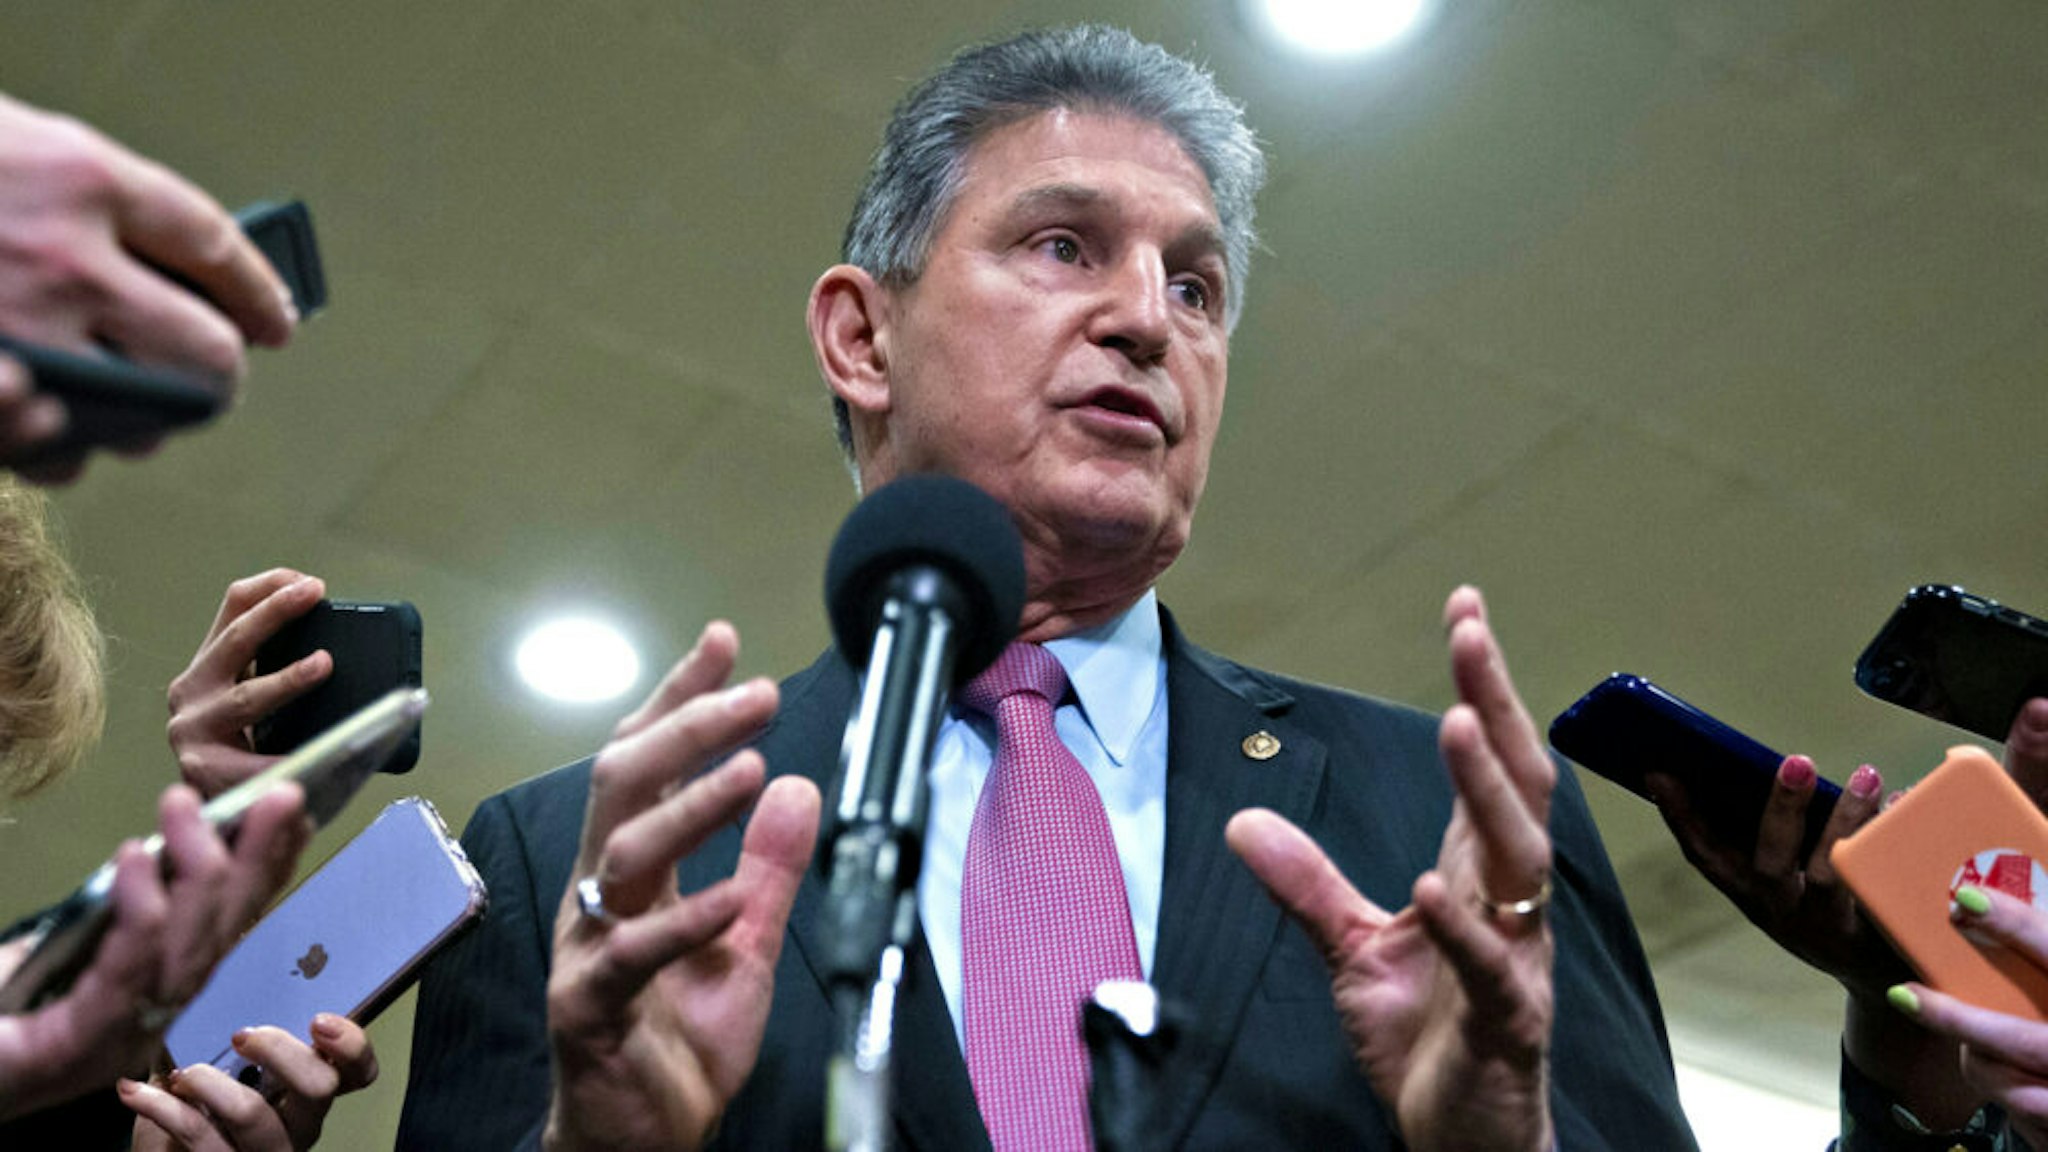 Senator Joe Manchin, a Democrat from West Virginia, speaks during a news conference in the Senate Subway of the U.S. Capitol in Washington, D.C., U.S., on Wednesday, Feb. 5, 2020. President Donald Trump's inevitable acquittal in the Senate's impeachment trial today has some House Democrats fretting that they should have delivered a more complete case to argue for his removal.